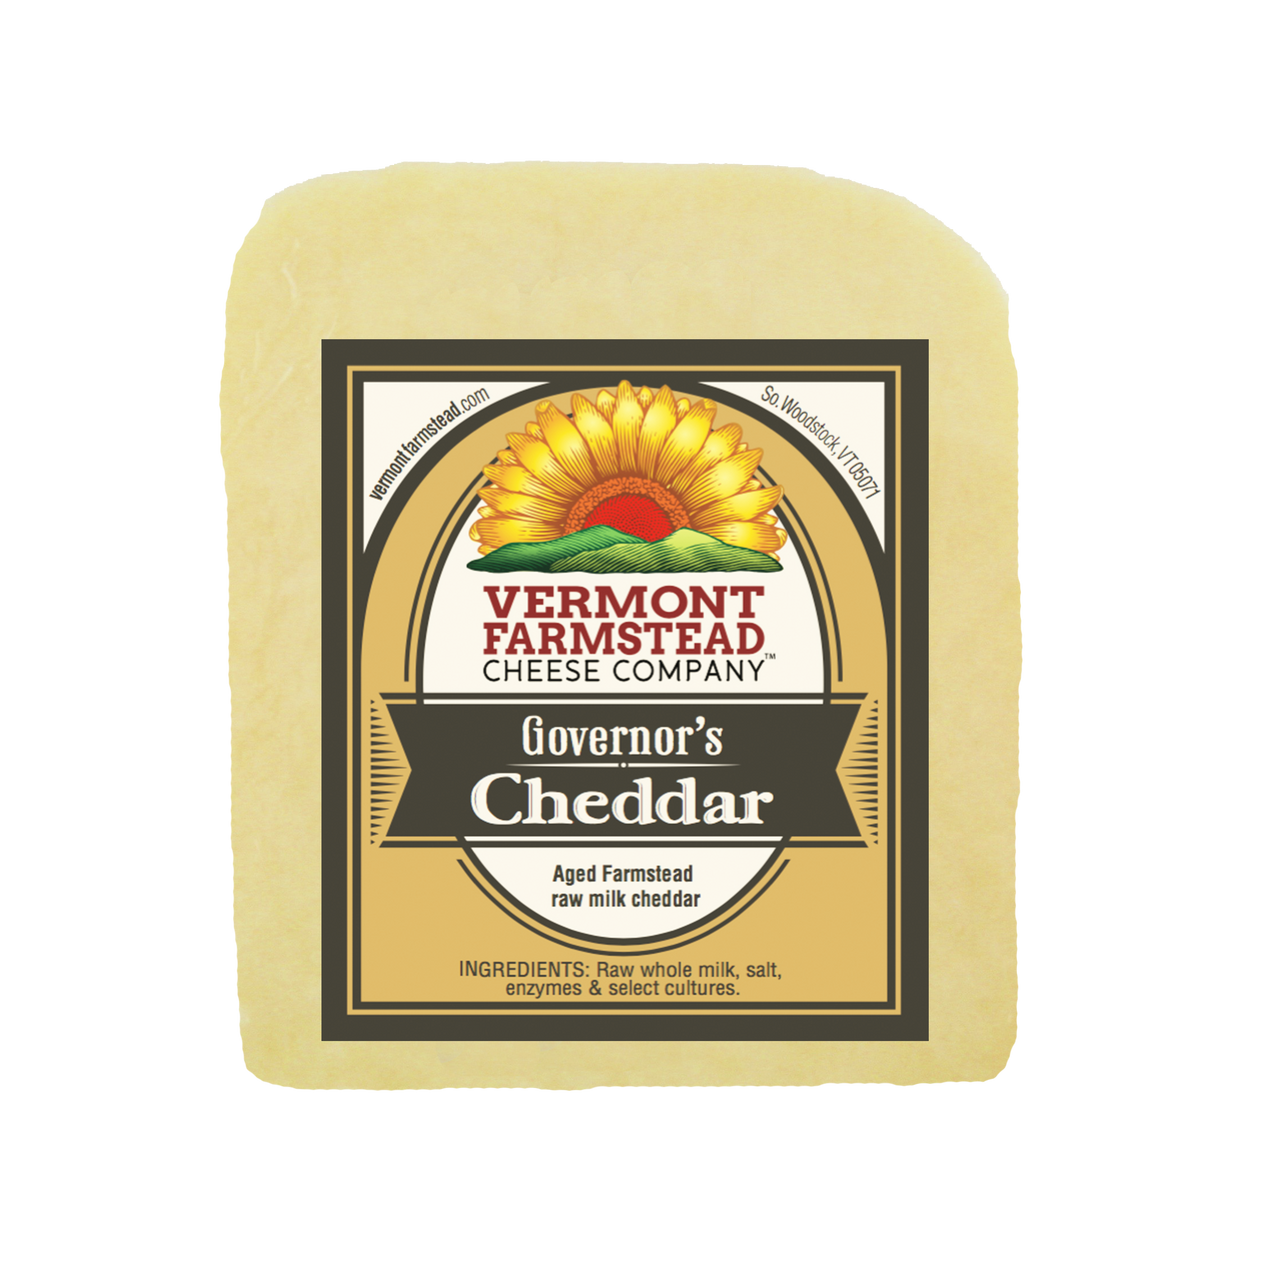 2.5# wedge Governor’s Cheddar